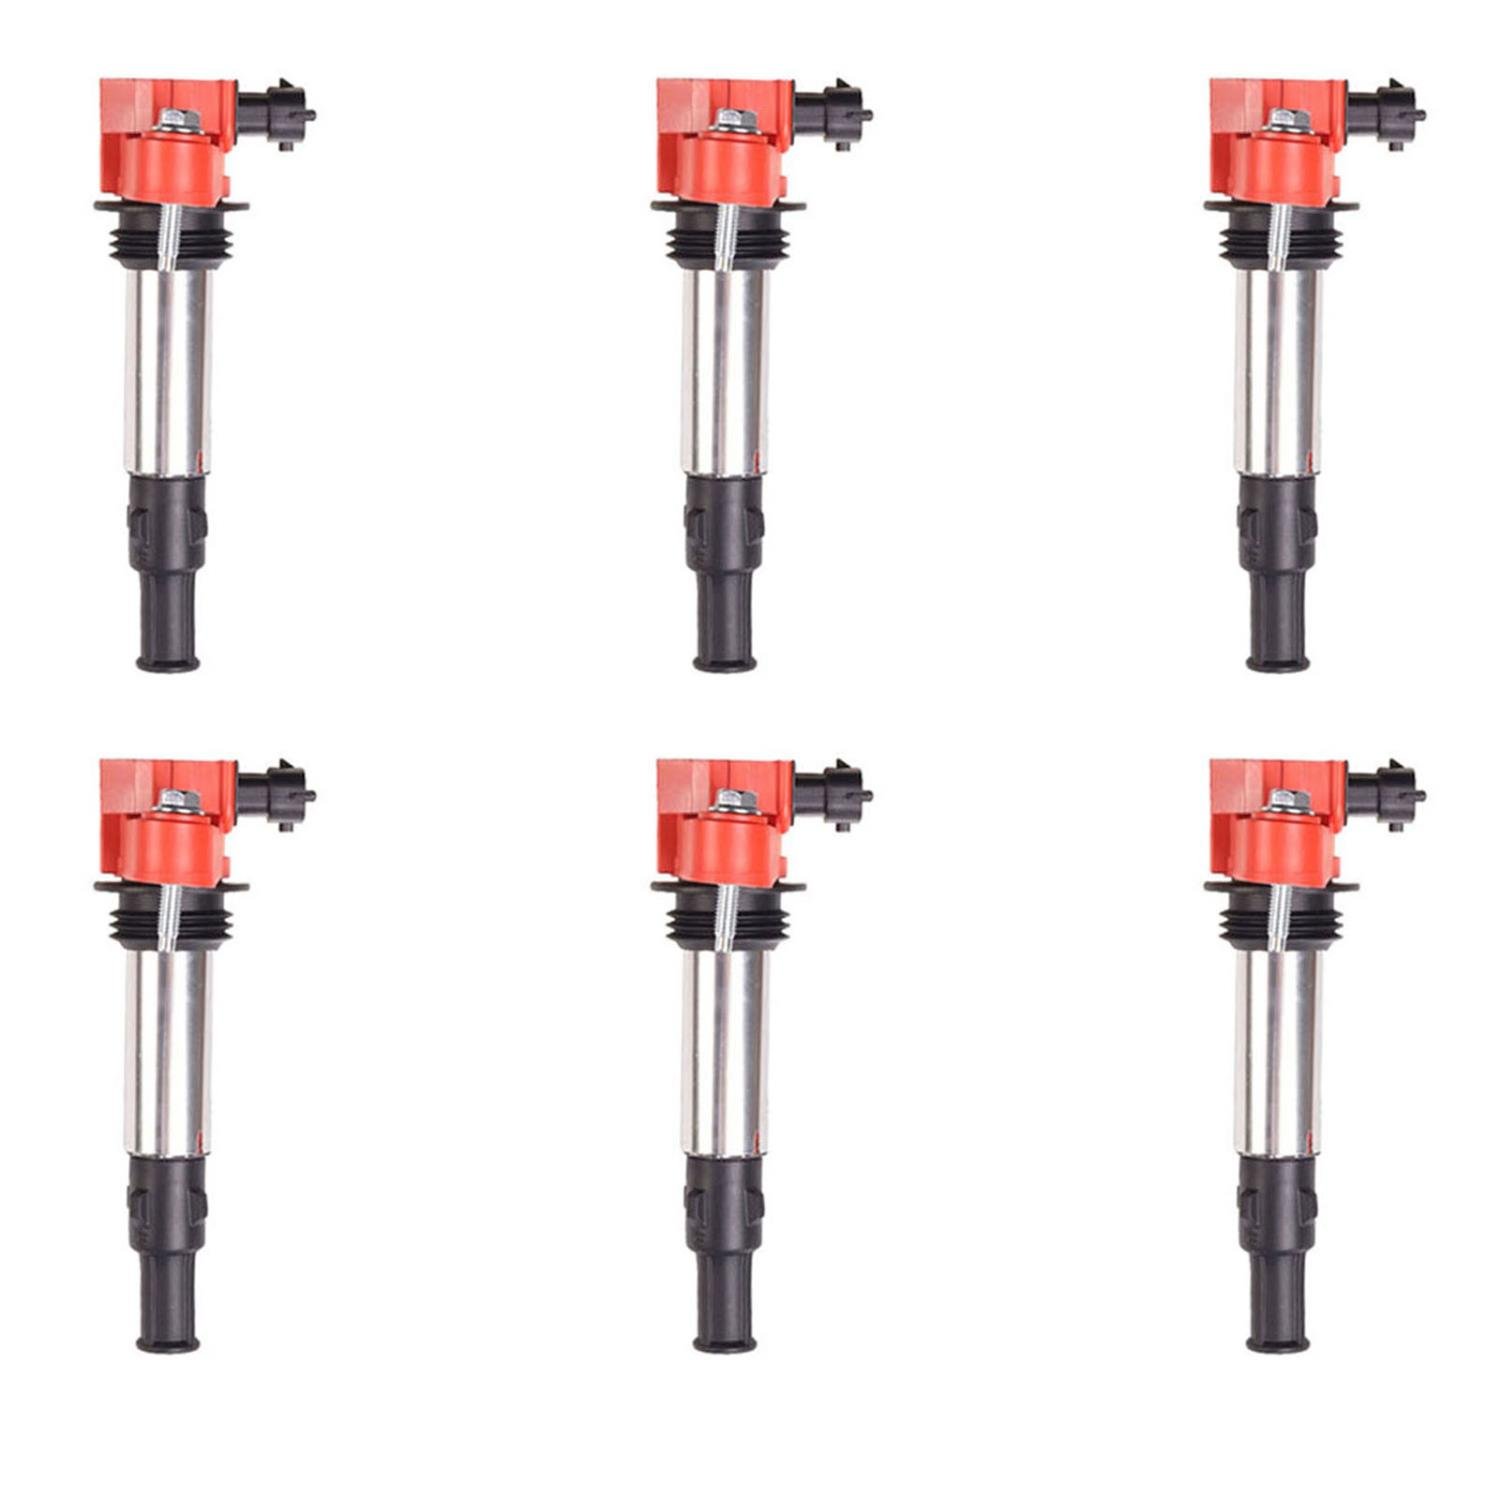 High-Performance Ignition Coils for Cadillac CTS/STS/SRX [Red]